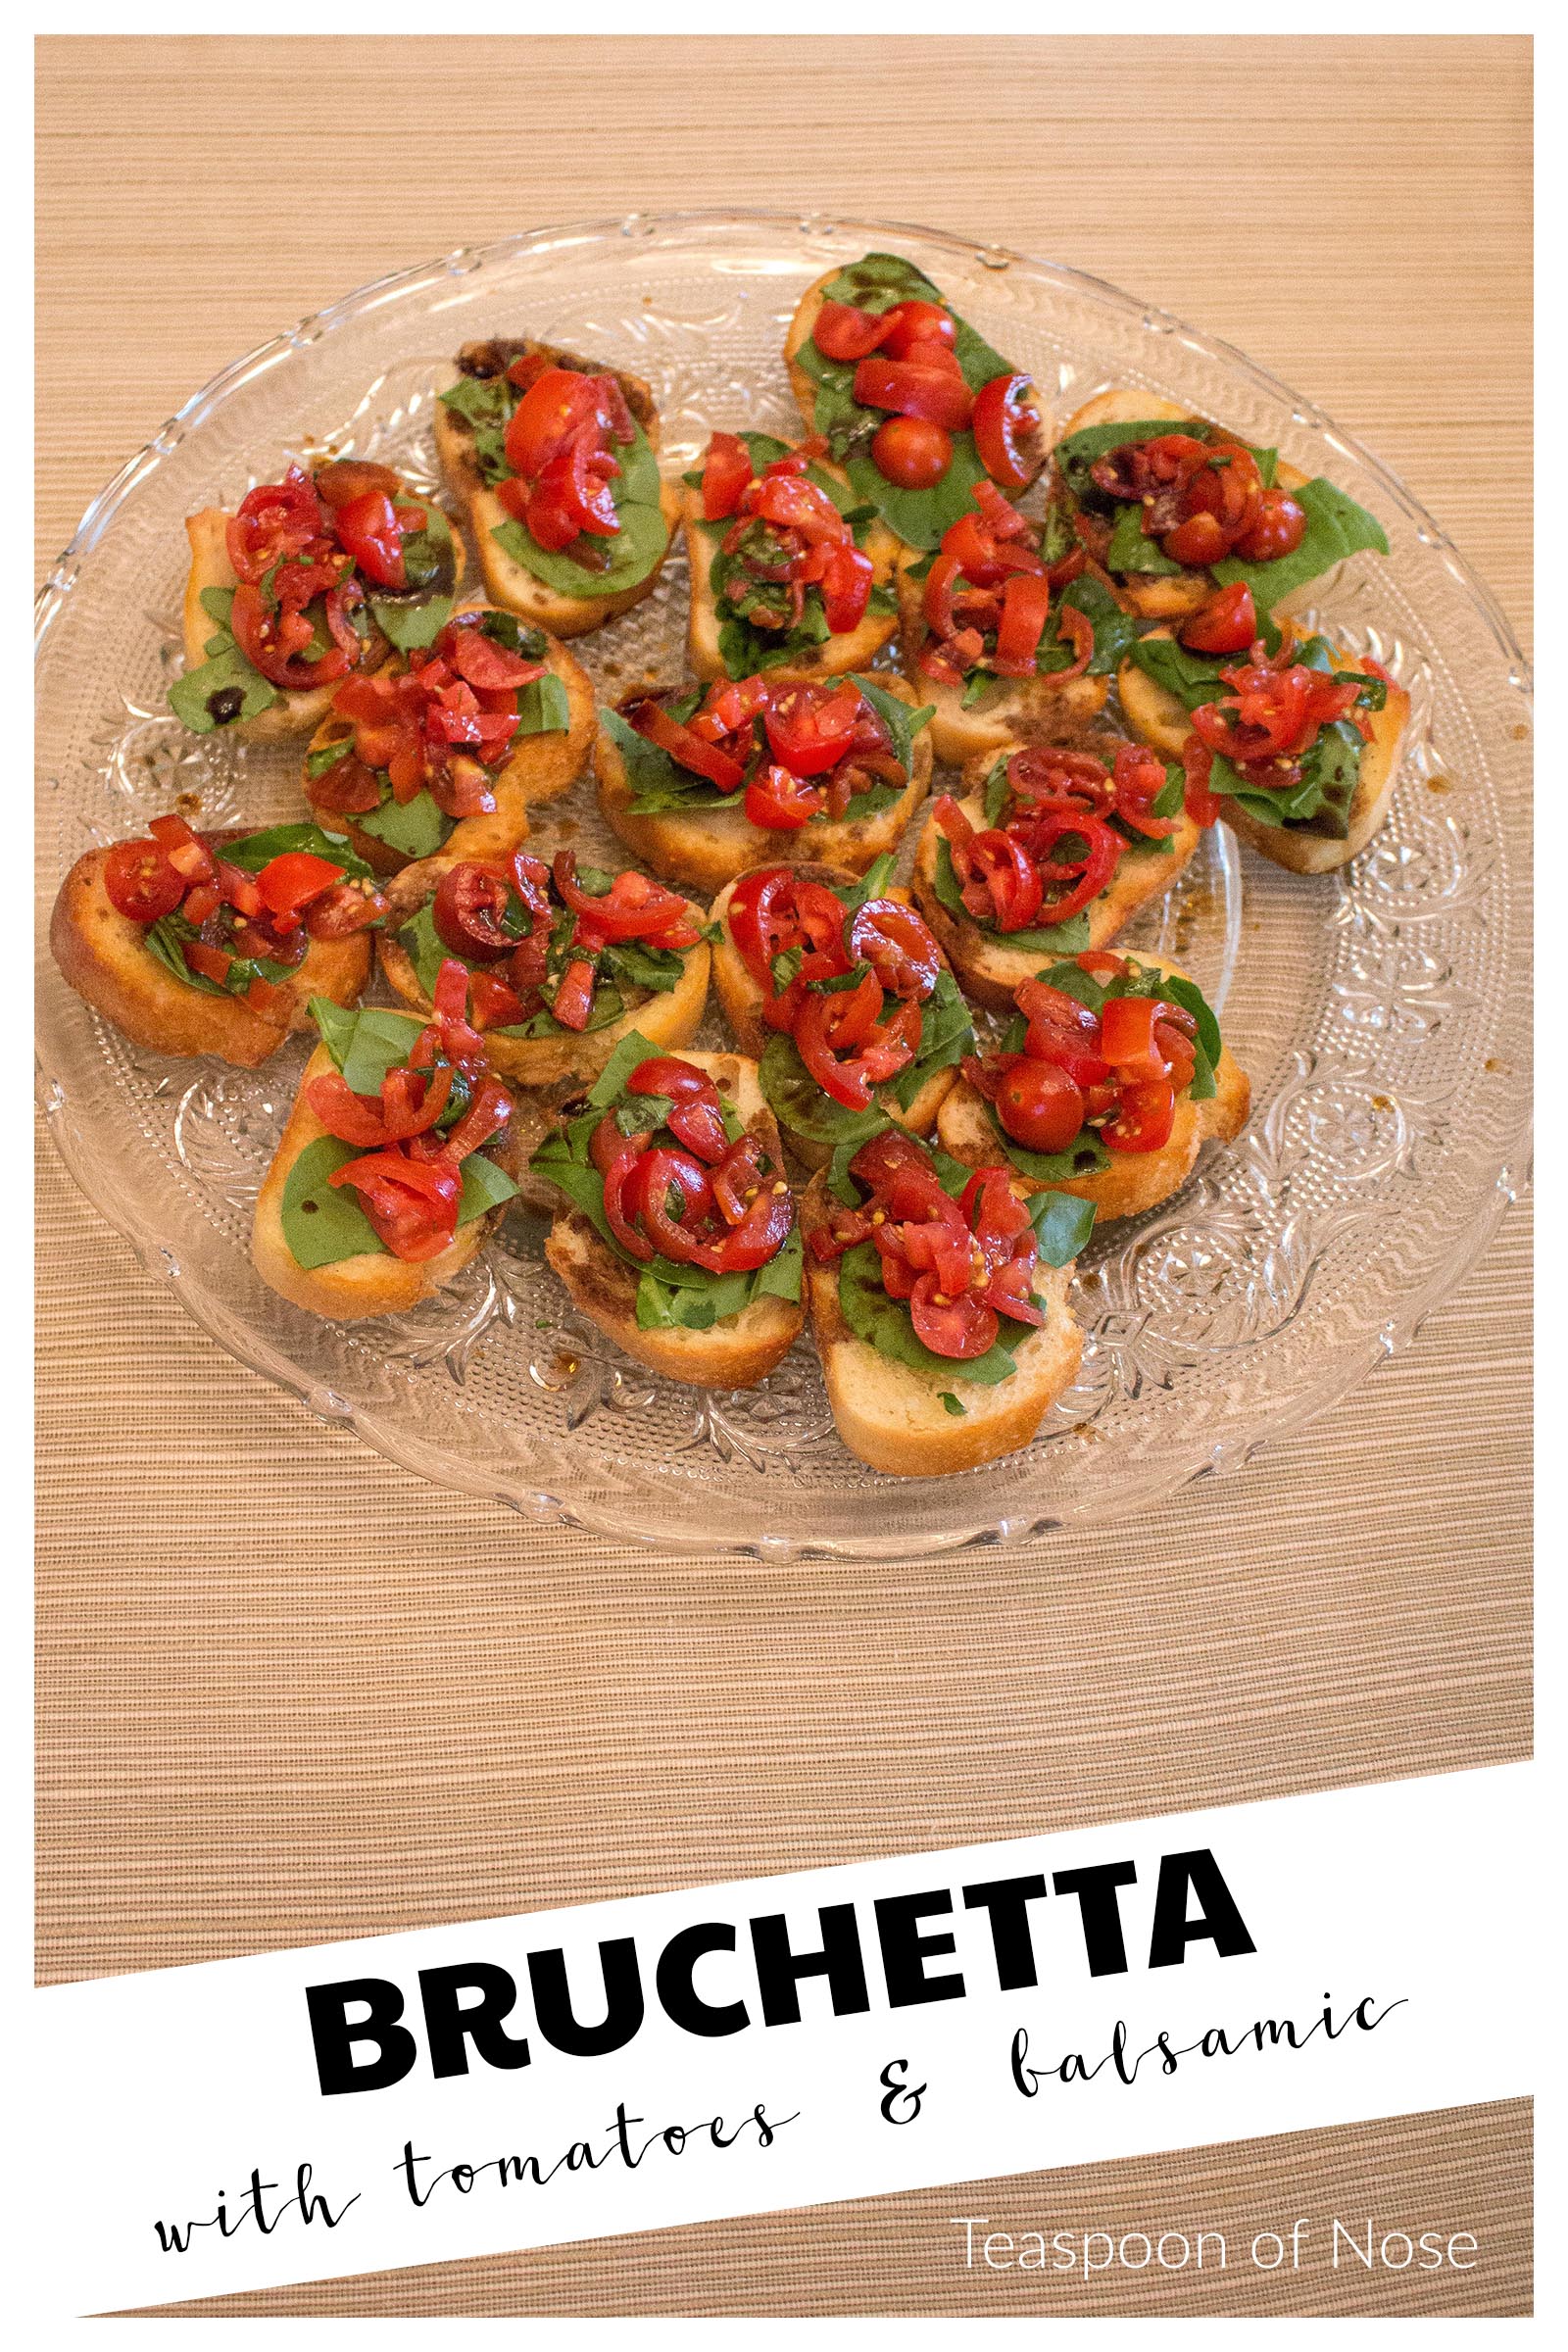 Bruschetta makes for a fresh summer appetizer, made even better by ingredients straight from the garden!  | Teaspoon of Nose